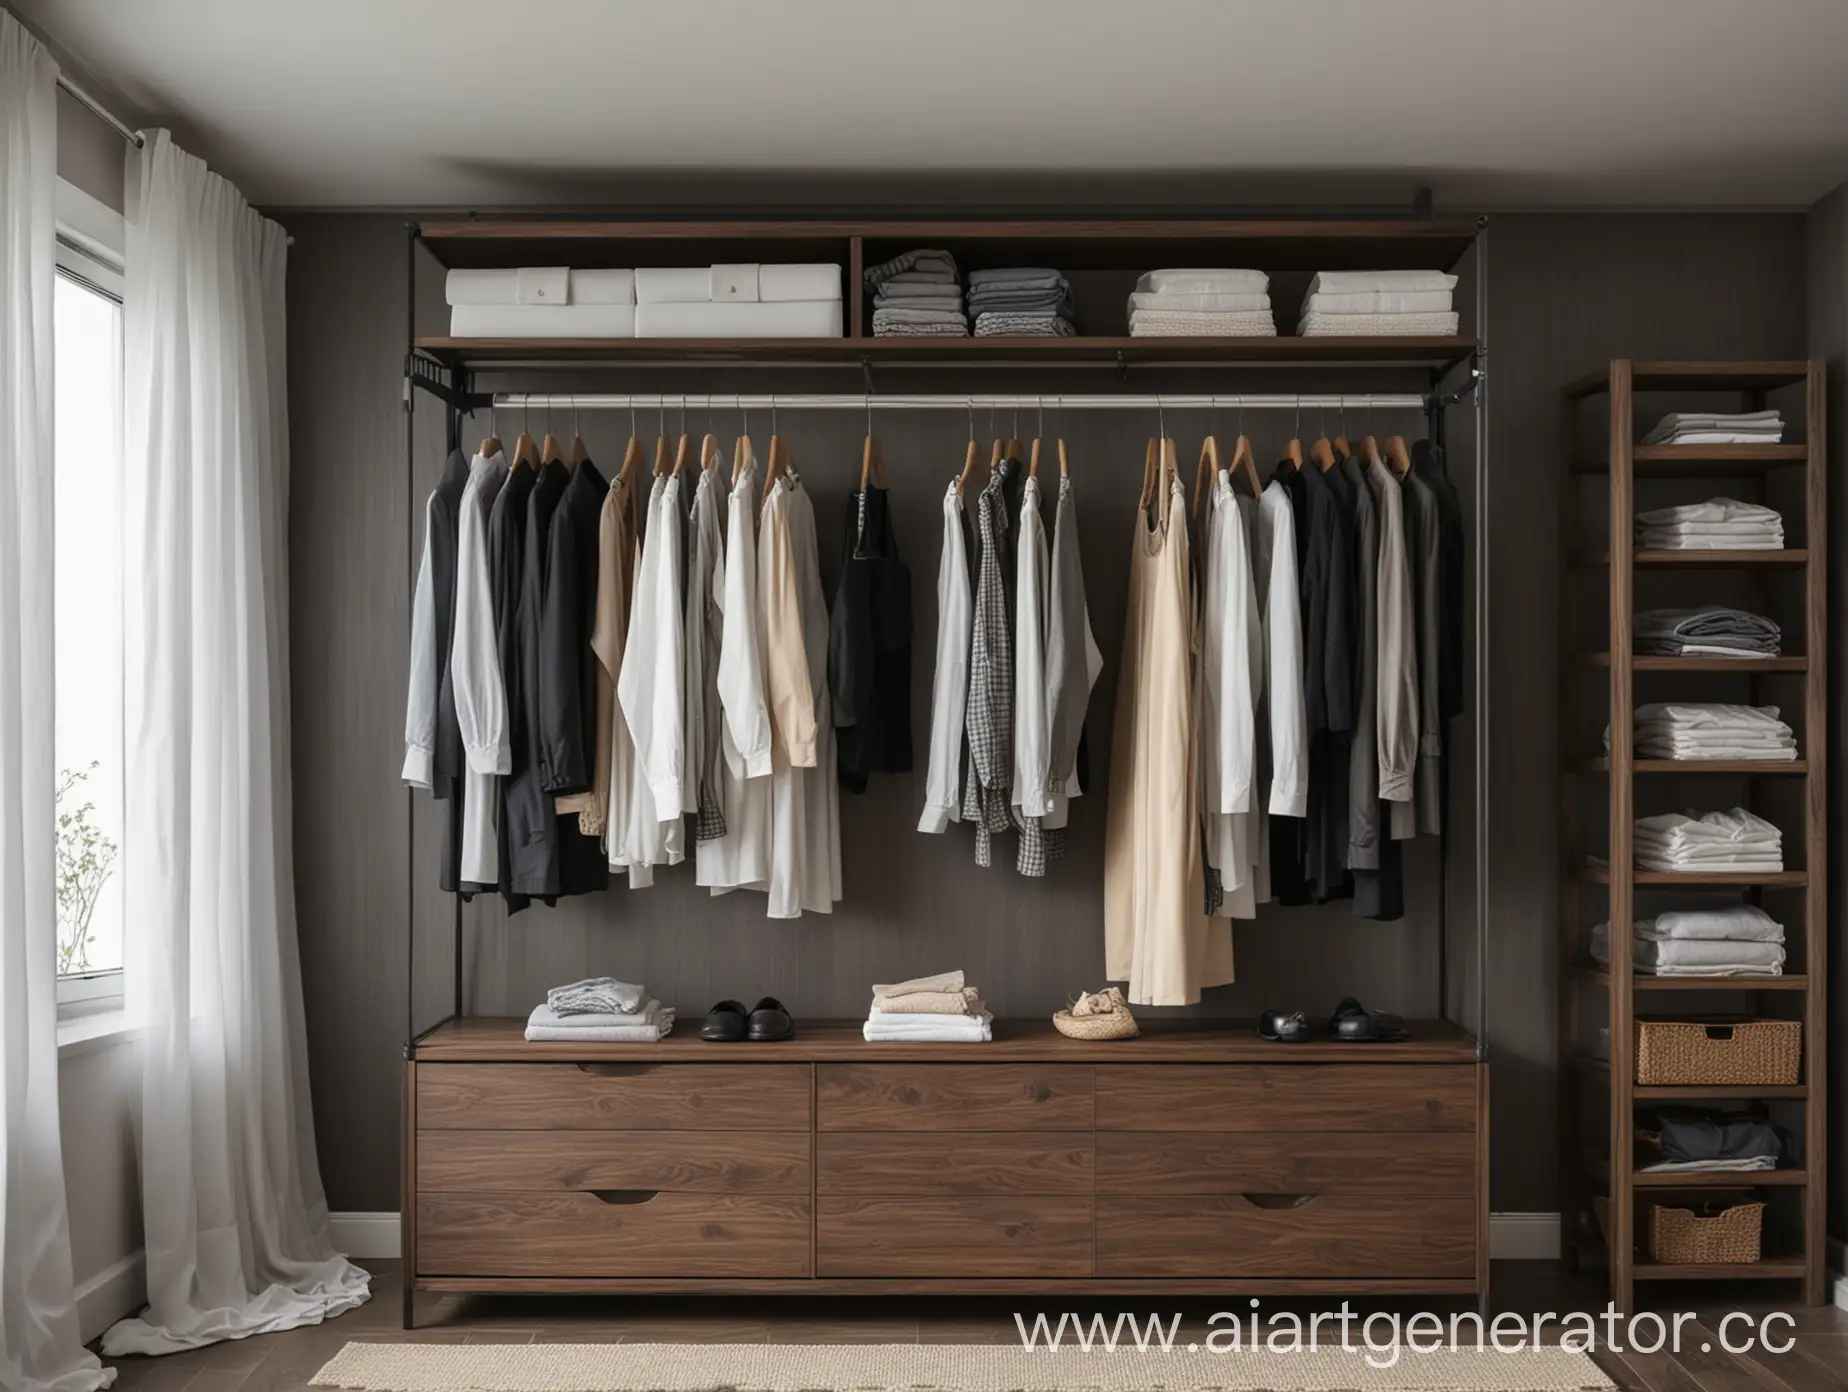 Dark-Wooden-Table-in-Front-of-Wardrobe-with-Hanging-Clothes